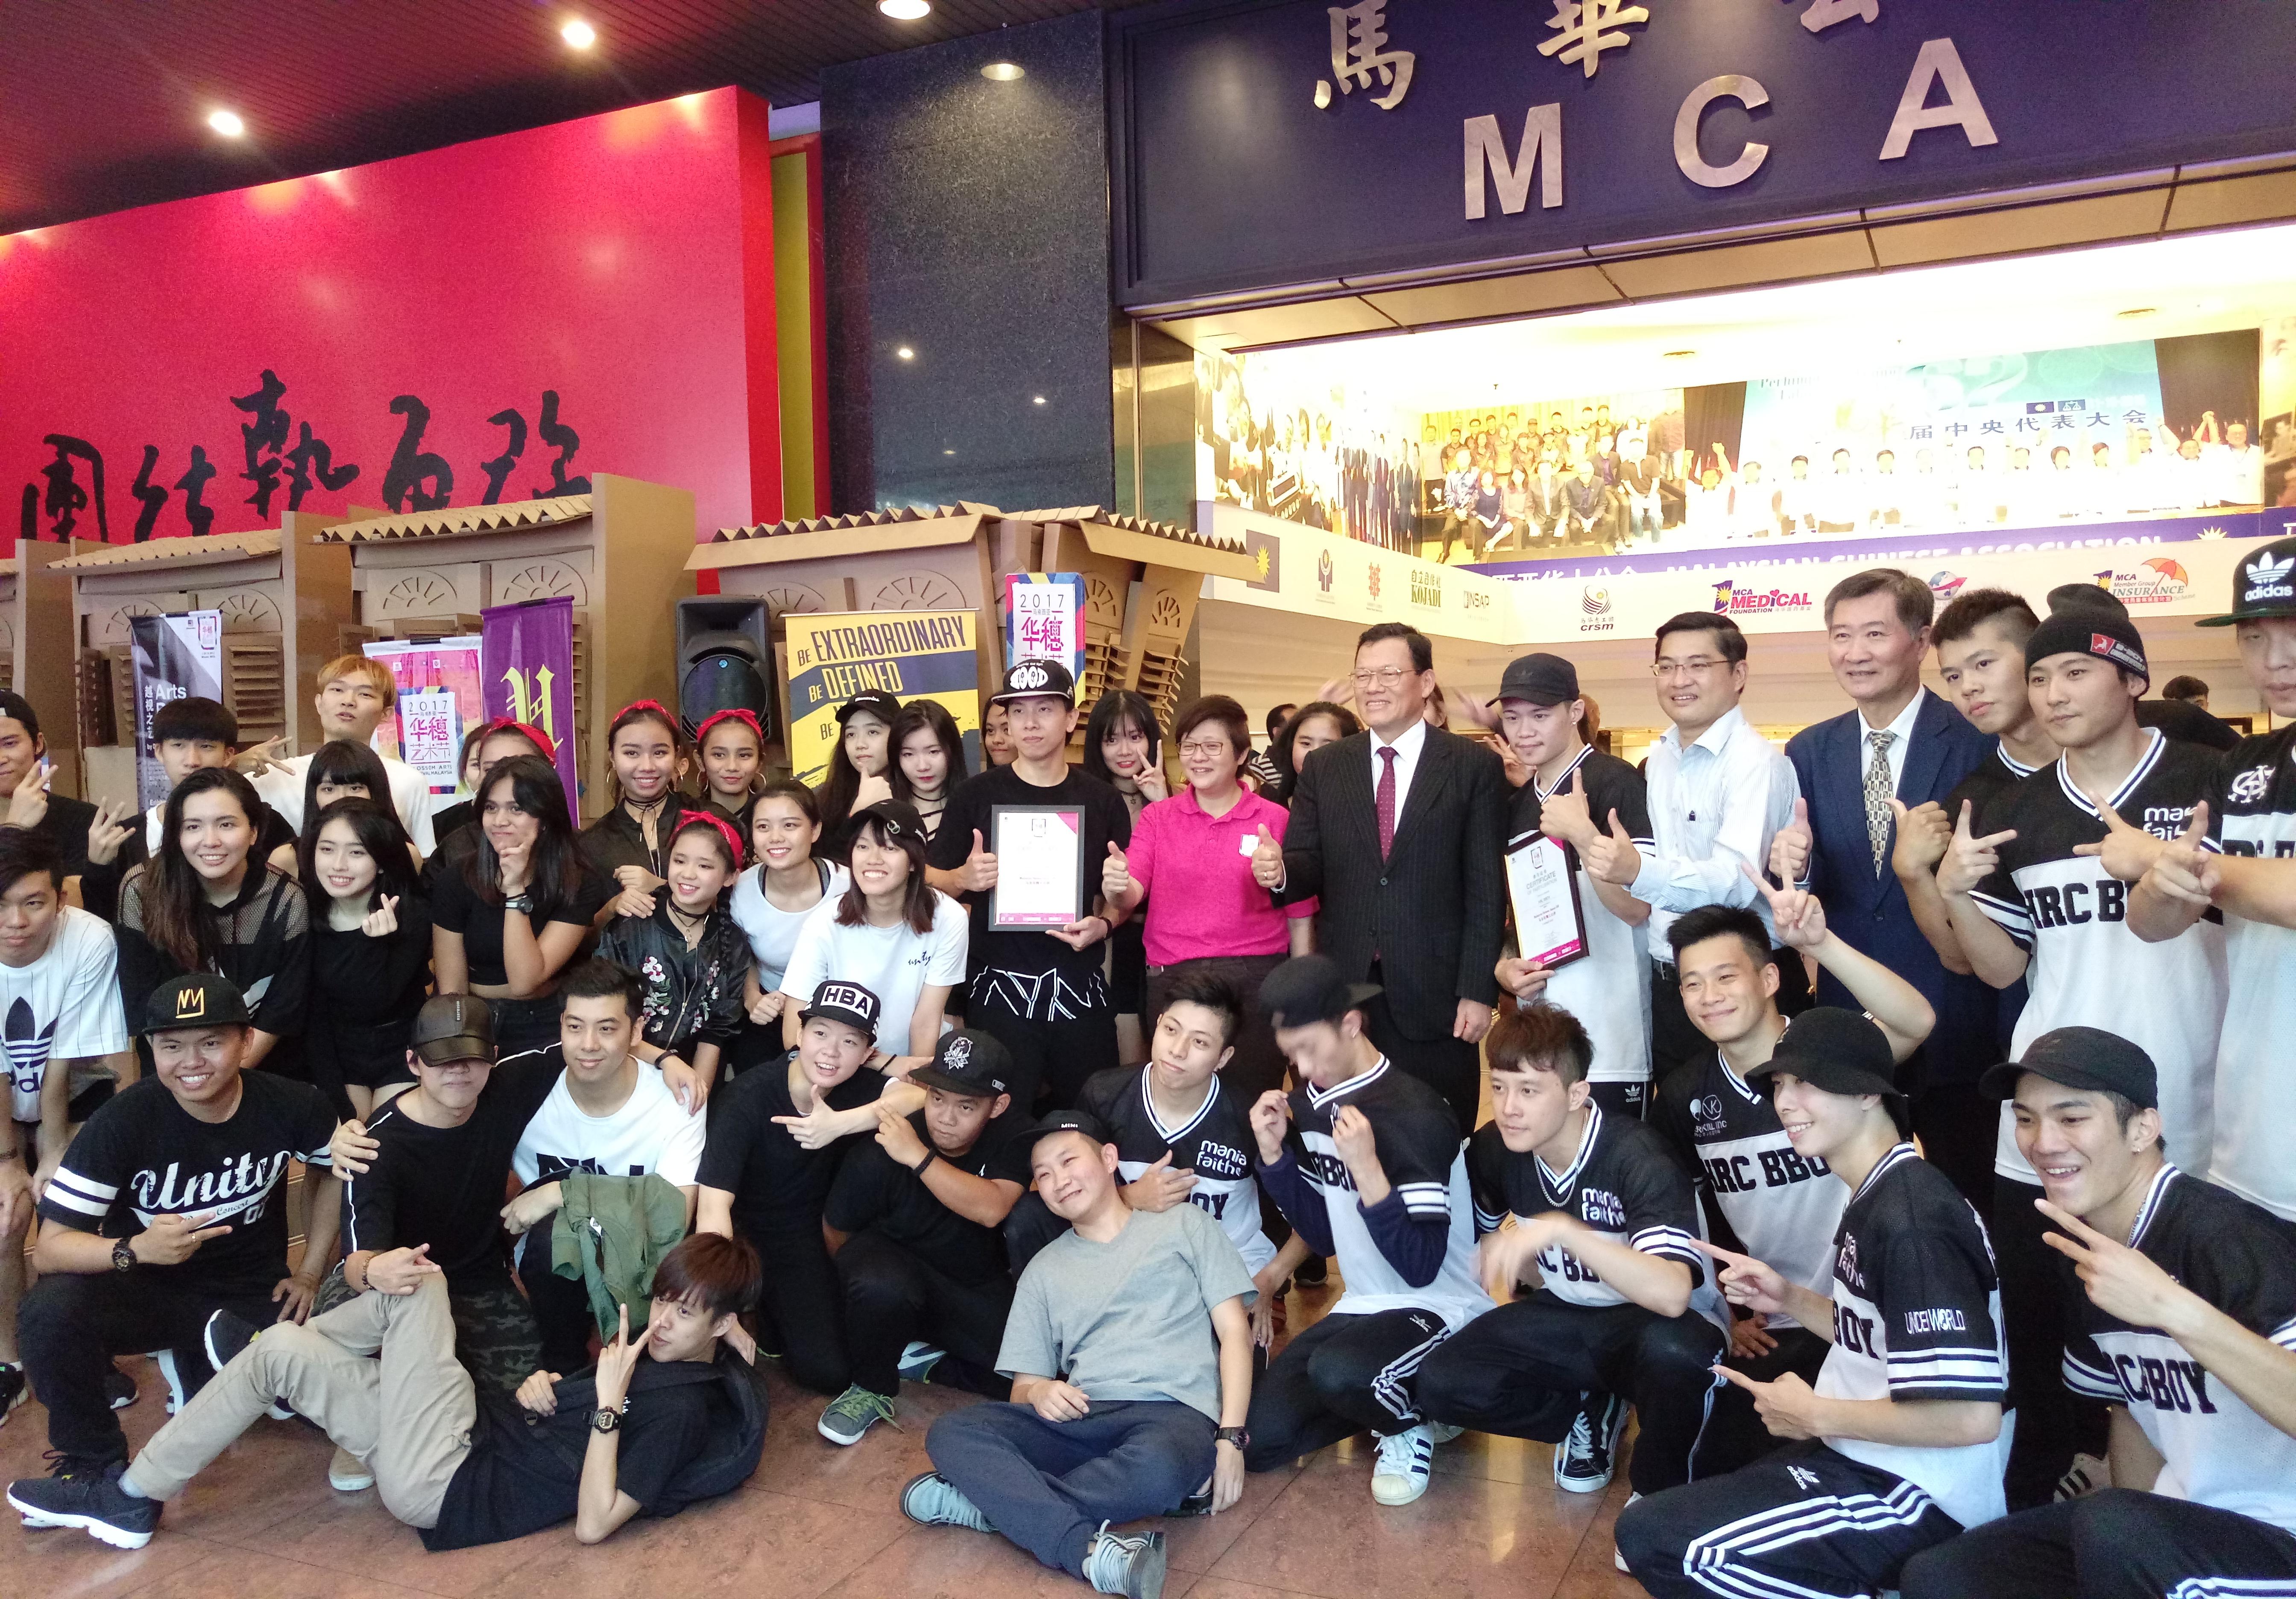 The VIPs and the attendants take group photo together.